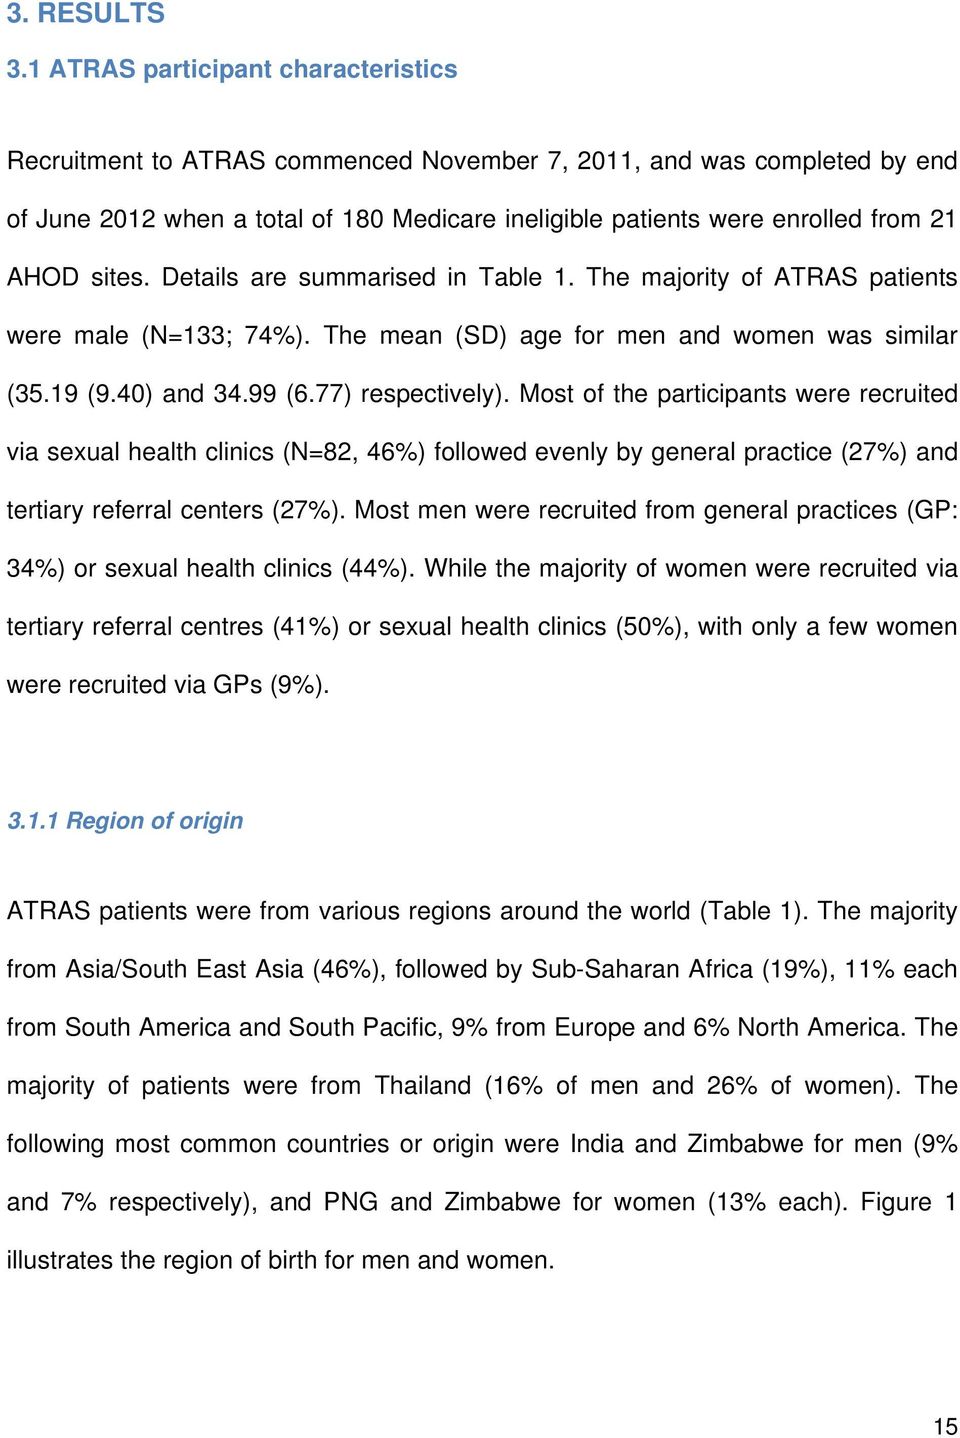 sites. Details are summarised in Table 1. The majority of ATRAS patients were male (N=133; 74%). The mean (SD) age for men and women was similar (35.19 (9.40) and 34.99 (6.77) respectively).